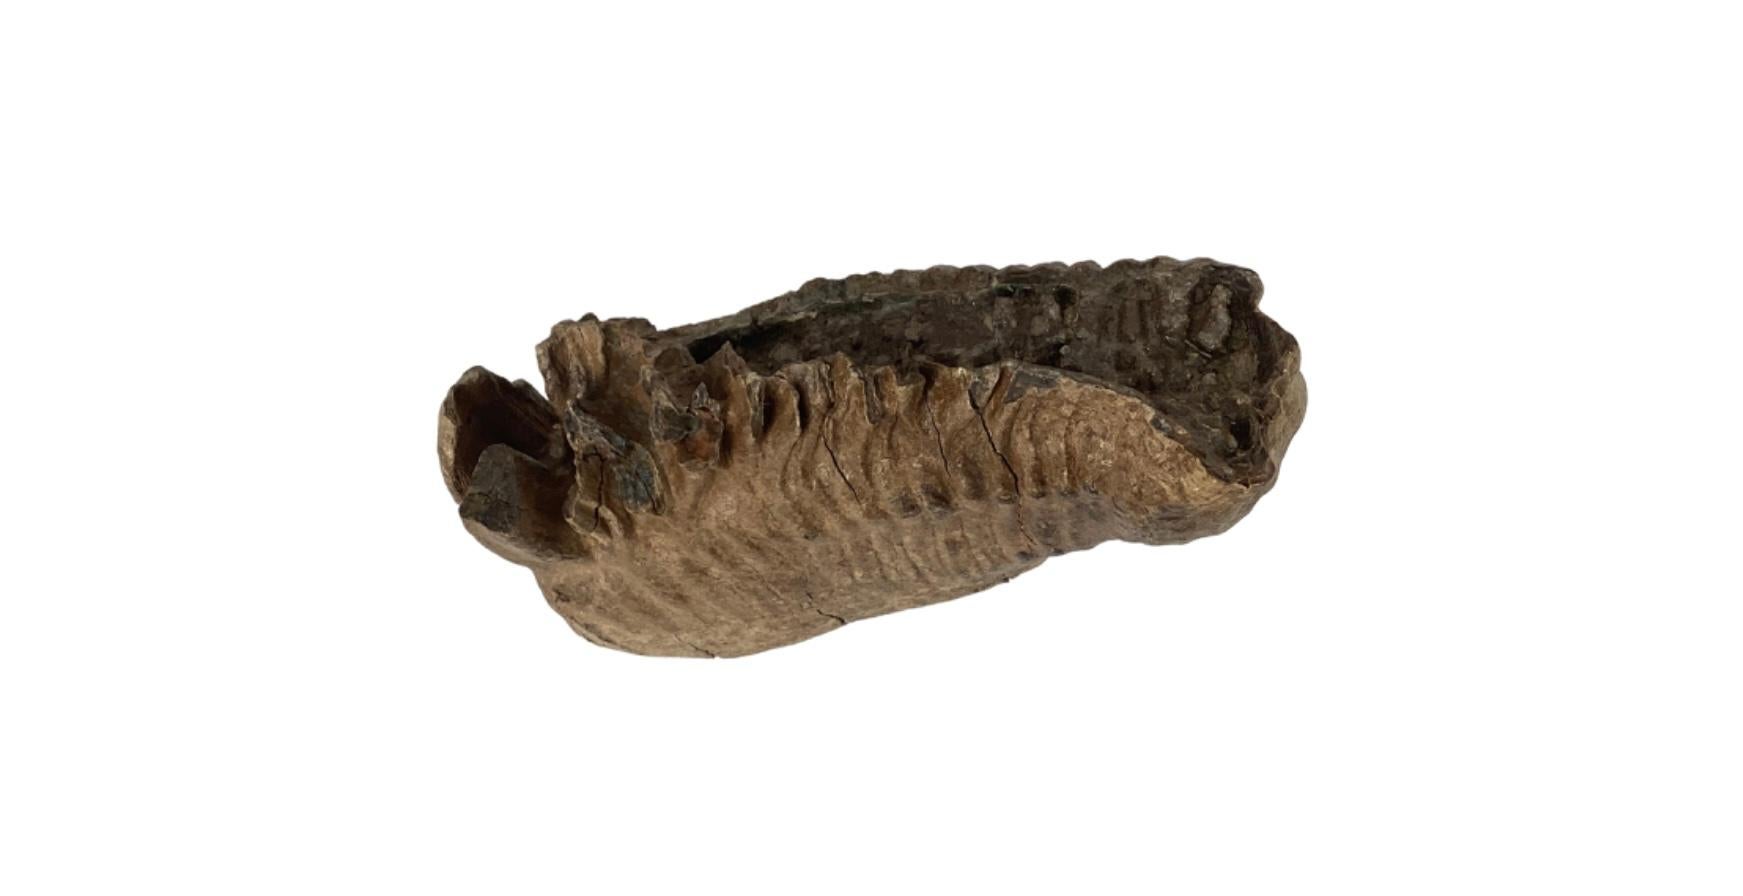 Large heavy Mastodon tooth fossil. Museum Quality tooth. Lots of tooth plate grooves. Makes a great display. Best of the best Super fine with no restoration or repair.